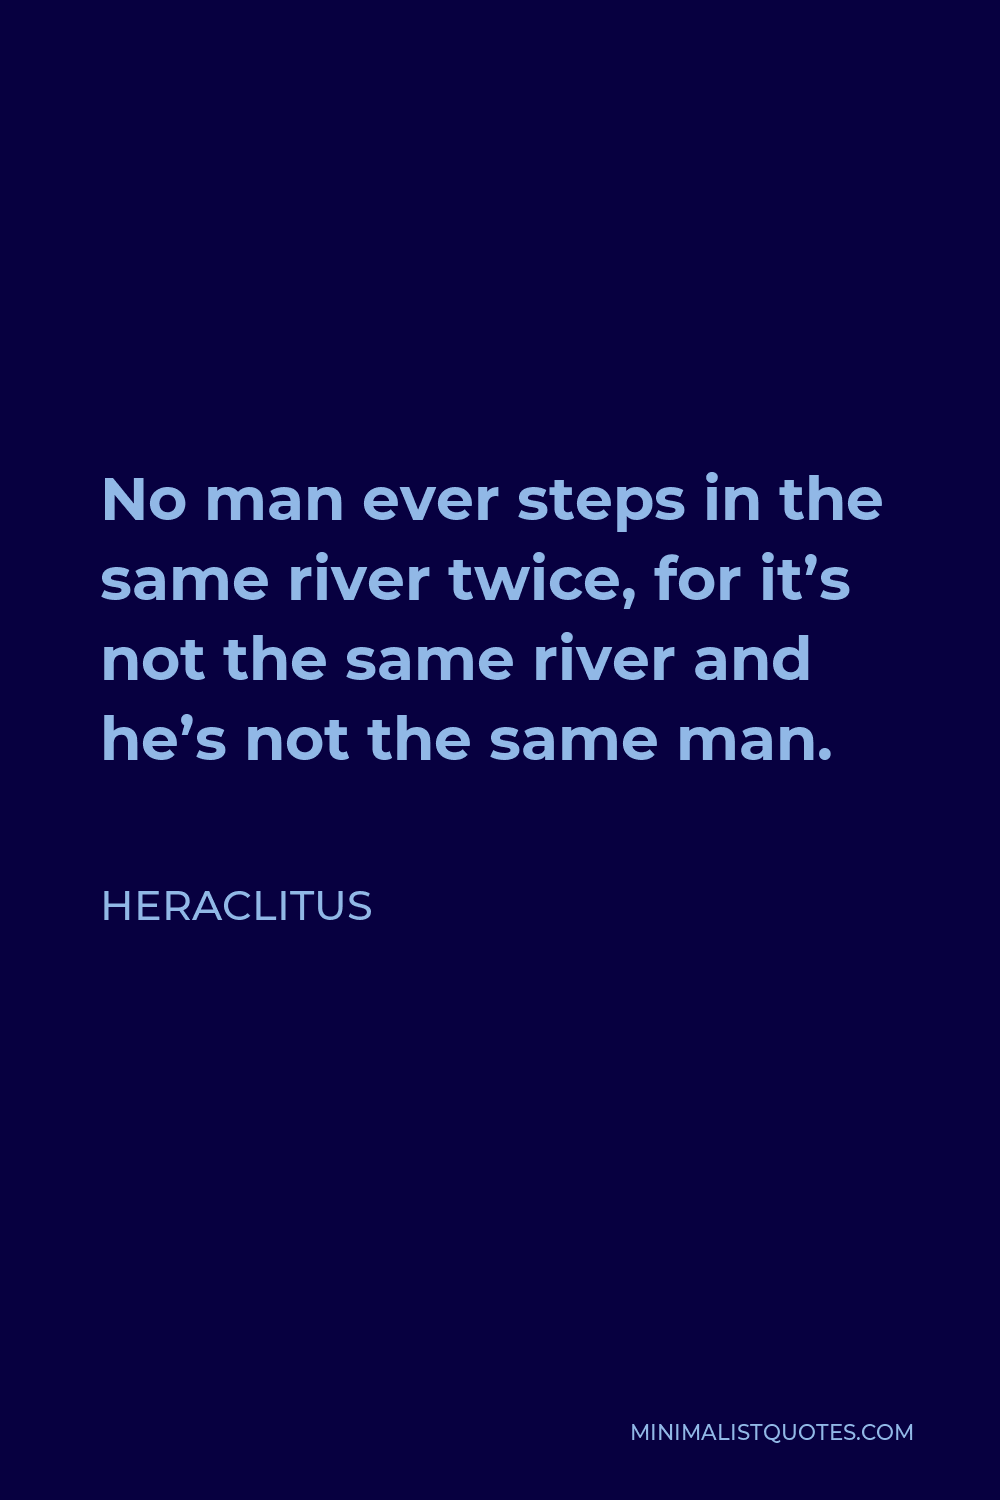 Heraclitus Quote - No man ever steps in the same river twice, for it’s not the same river and he’s not the same man.